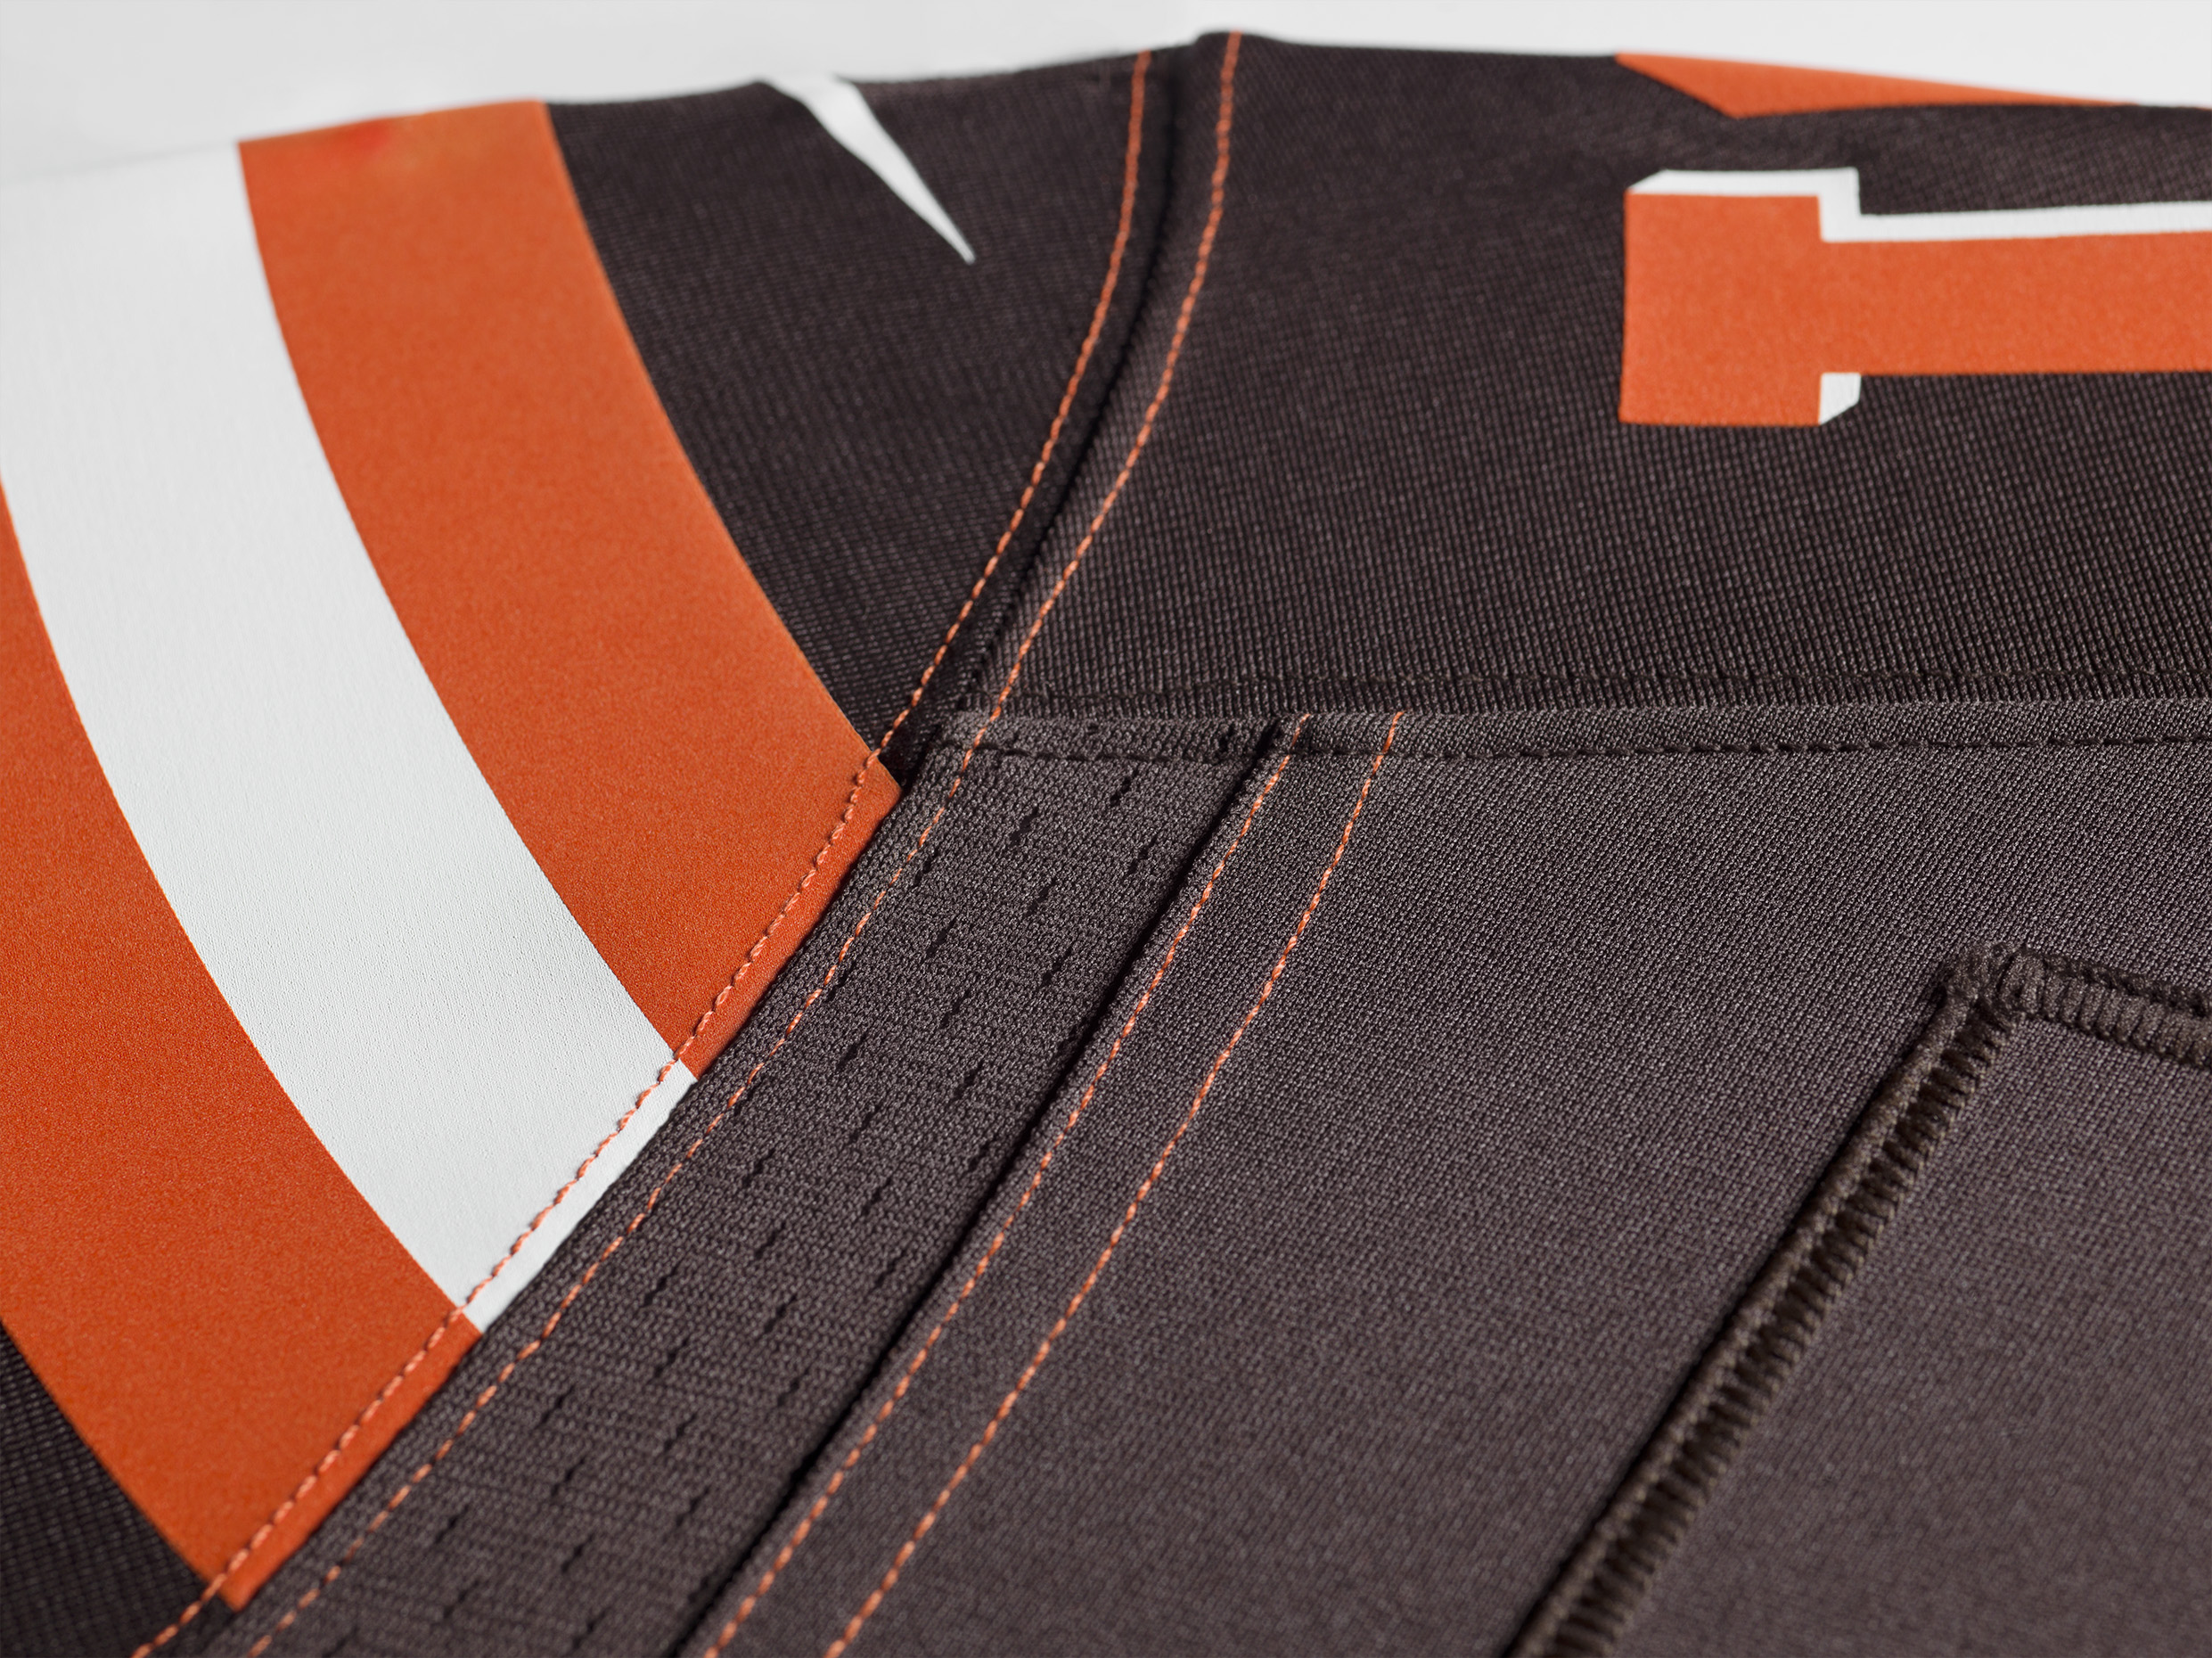 FA15_NFL_BROWNS_GAME_Detail_Tech_Fit1_0028.jpg